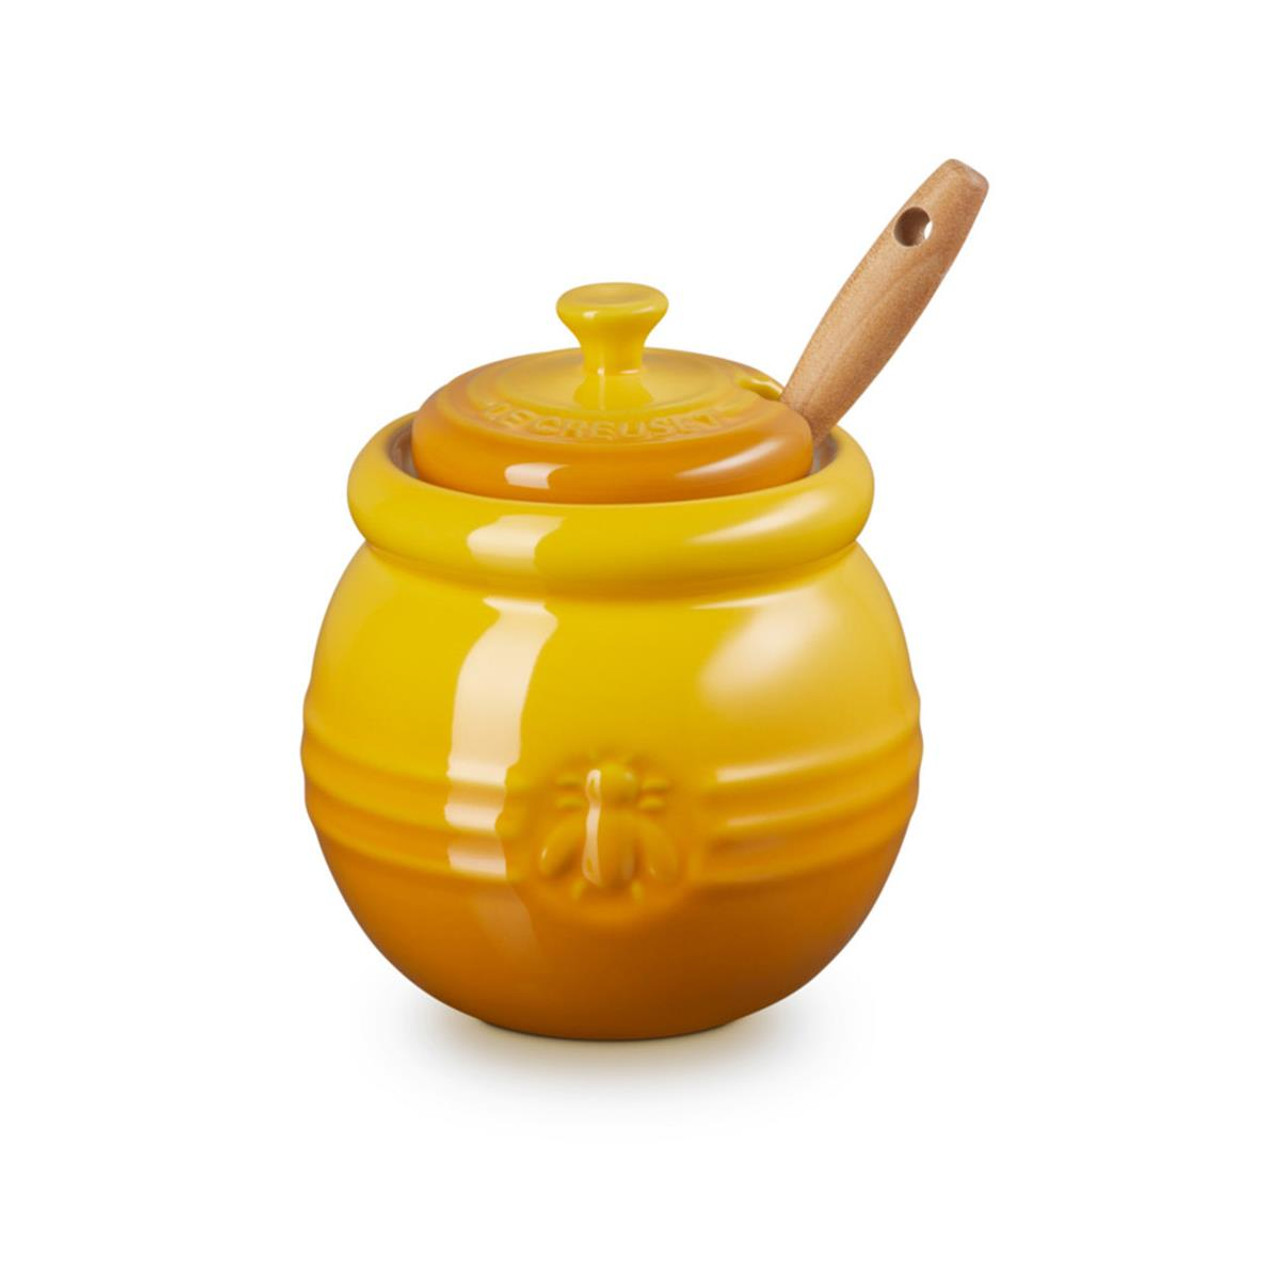 Le Creuset Stoneware Honey Pot With Dipper Questions & Answers